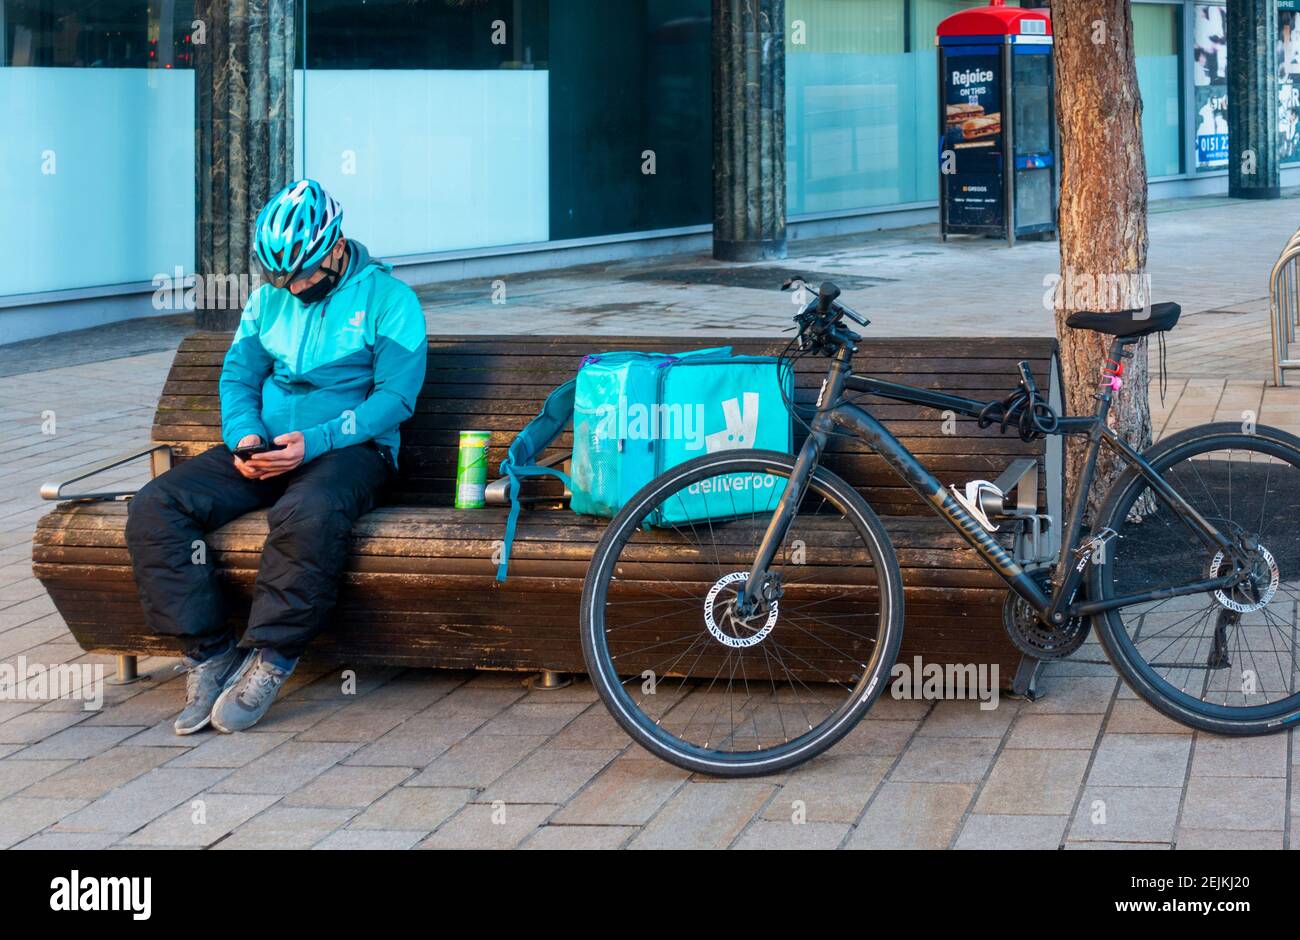 Deliveroo bike delivery man checking his cell phone for orders in Liverpool Stock Photo